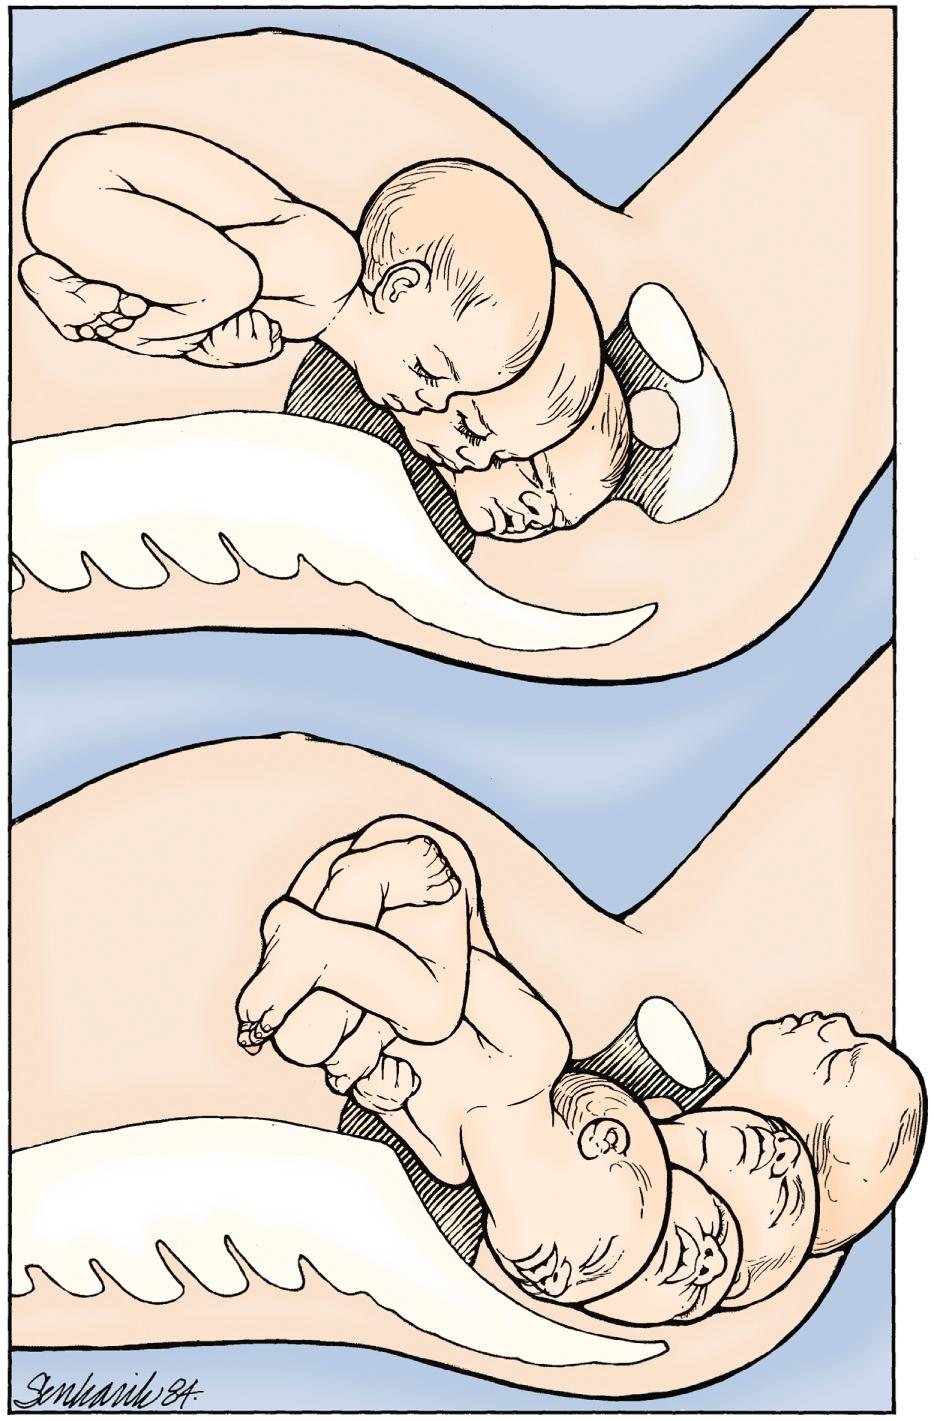 Fig. 17.9, Engagement, descent, and internal rotation remain cardinal elements of vaginal delivery in the case of a face presentation, but successful vaginal delivery of a term-size fetus presenting a face generally requires delivery by flexion under the symphysis from a mentum anterior position, as illustrated here.